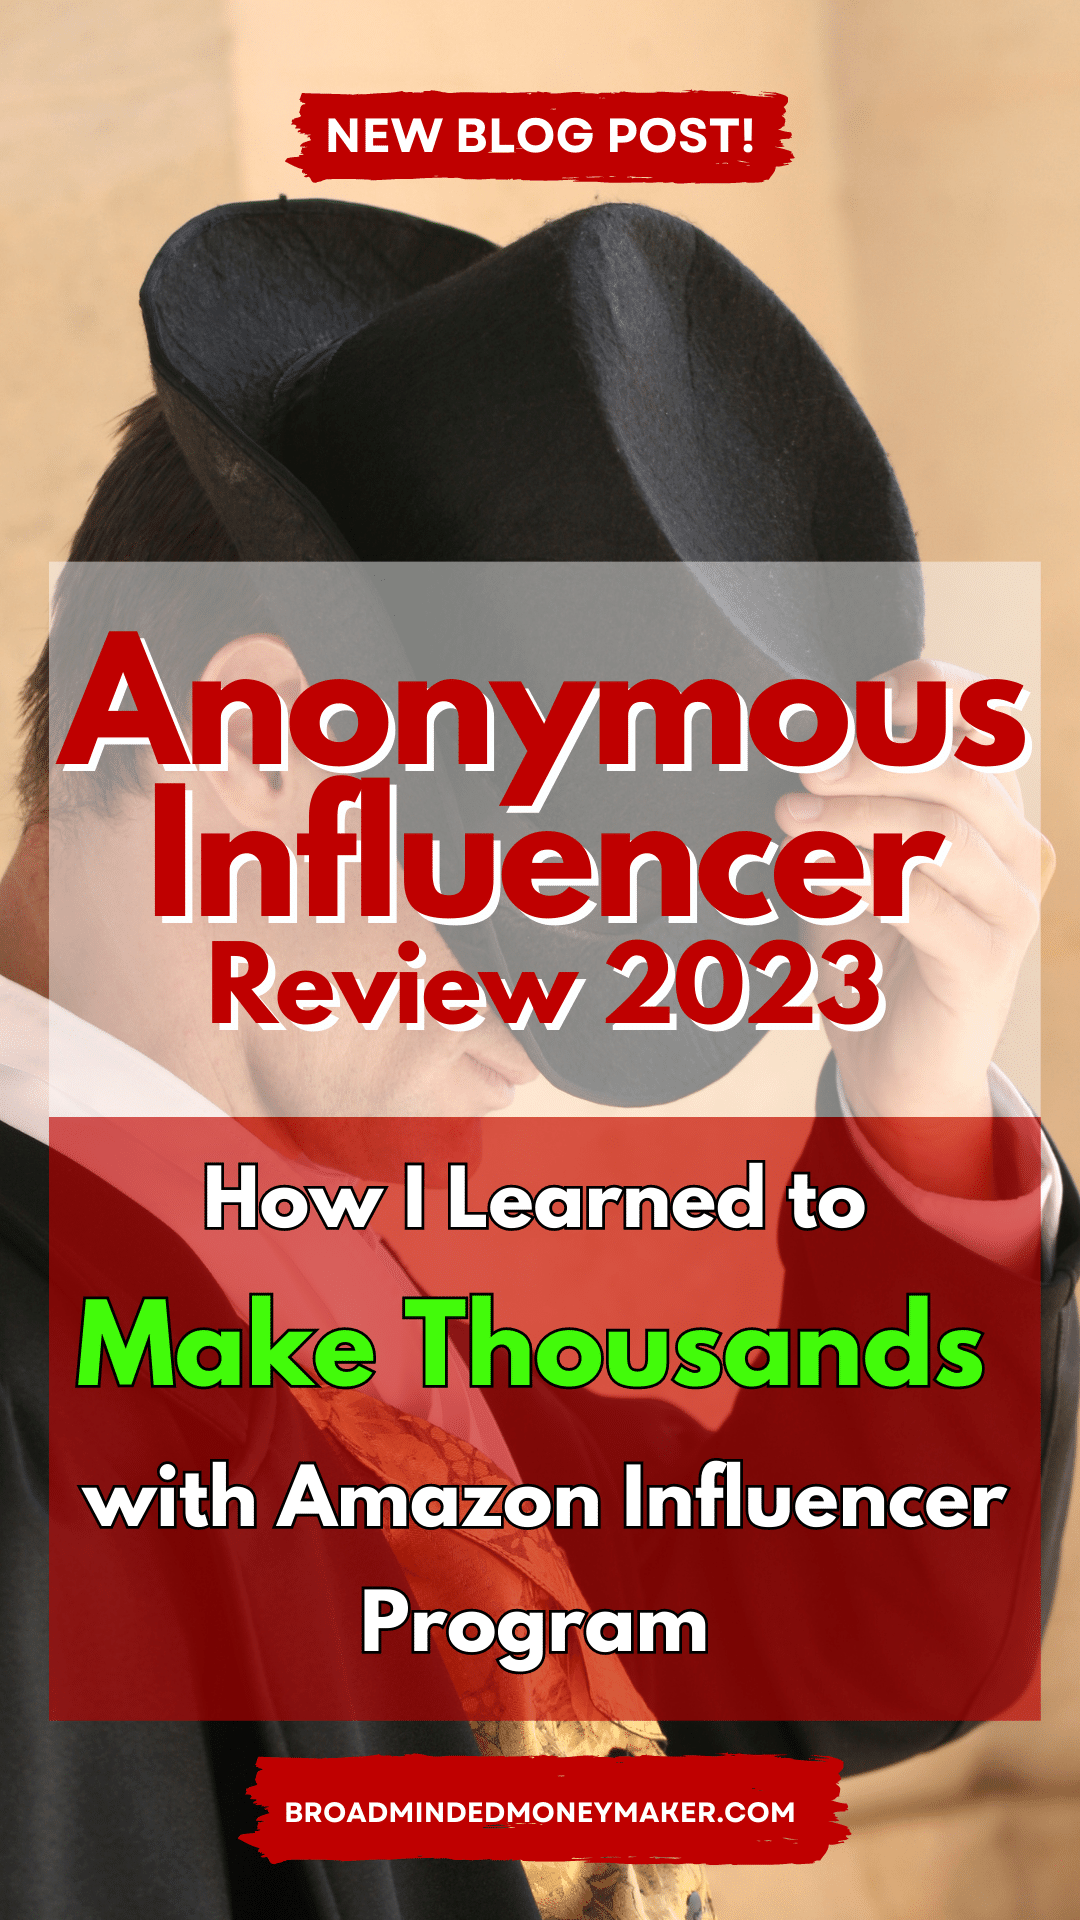 Anonymous Influencer Course | Get Approved and Learn to Earn with the Amazon Influencer Program | Learn to Earn Thousands with the Anonymous Influencer Training | Anonymous Influencer Review 2023